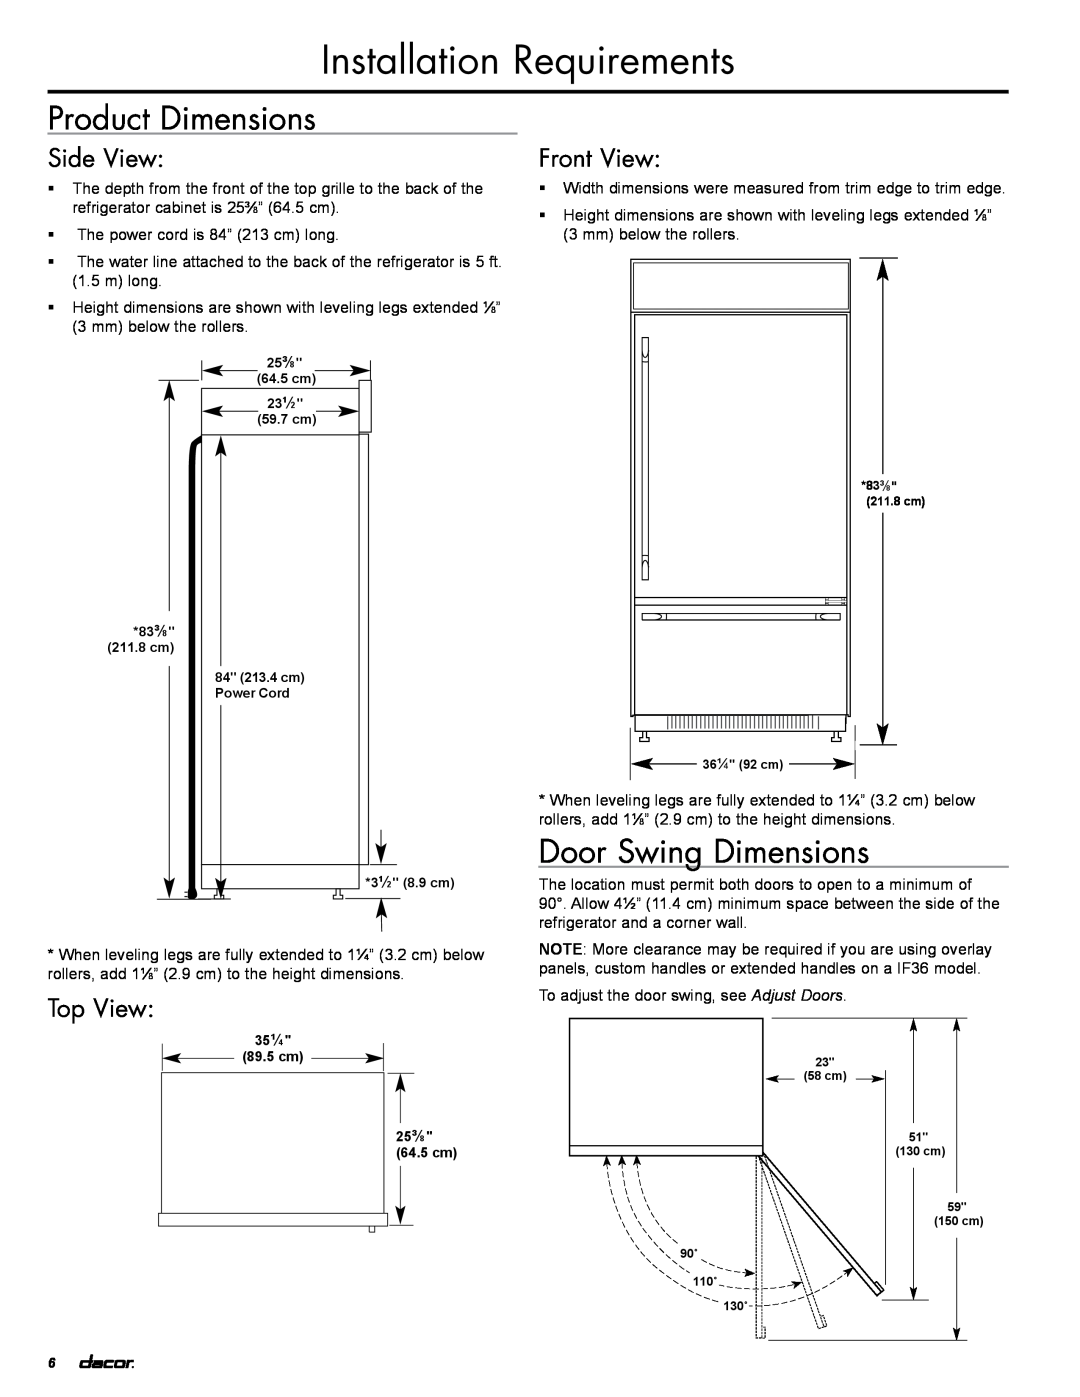 Dacor IF36LNBOL Product Dimensions, Door Swing Dimensions, Side View, Top View, Front View, Installation Requirements 